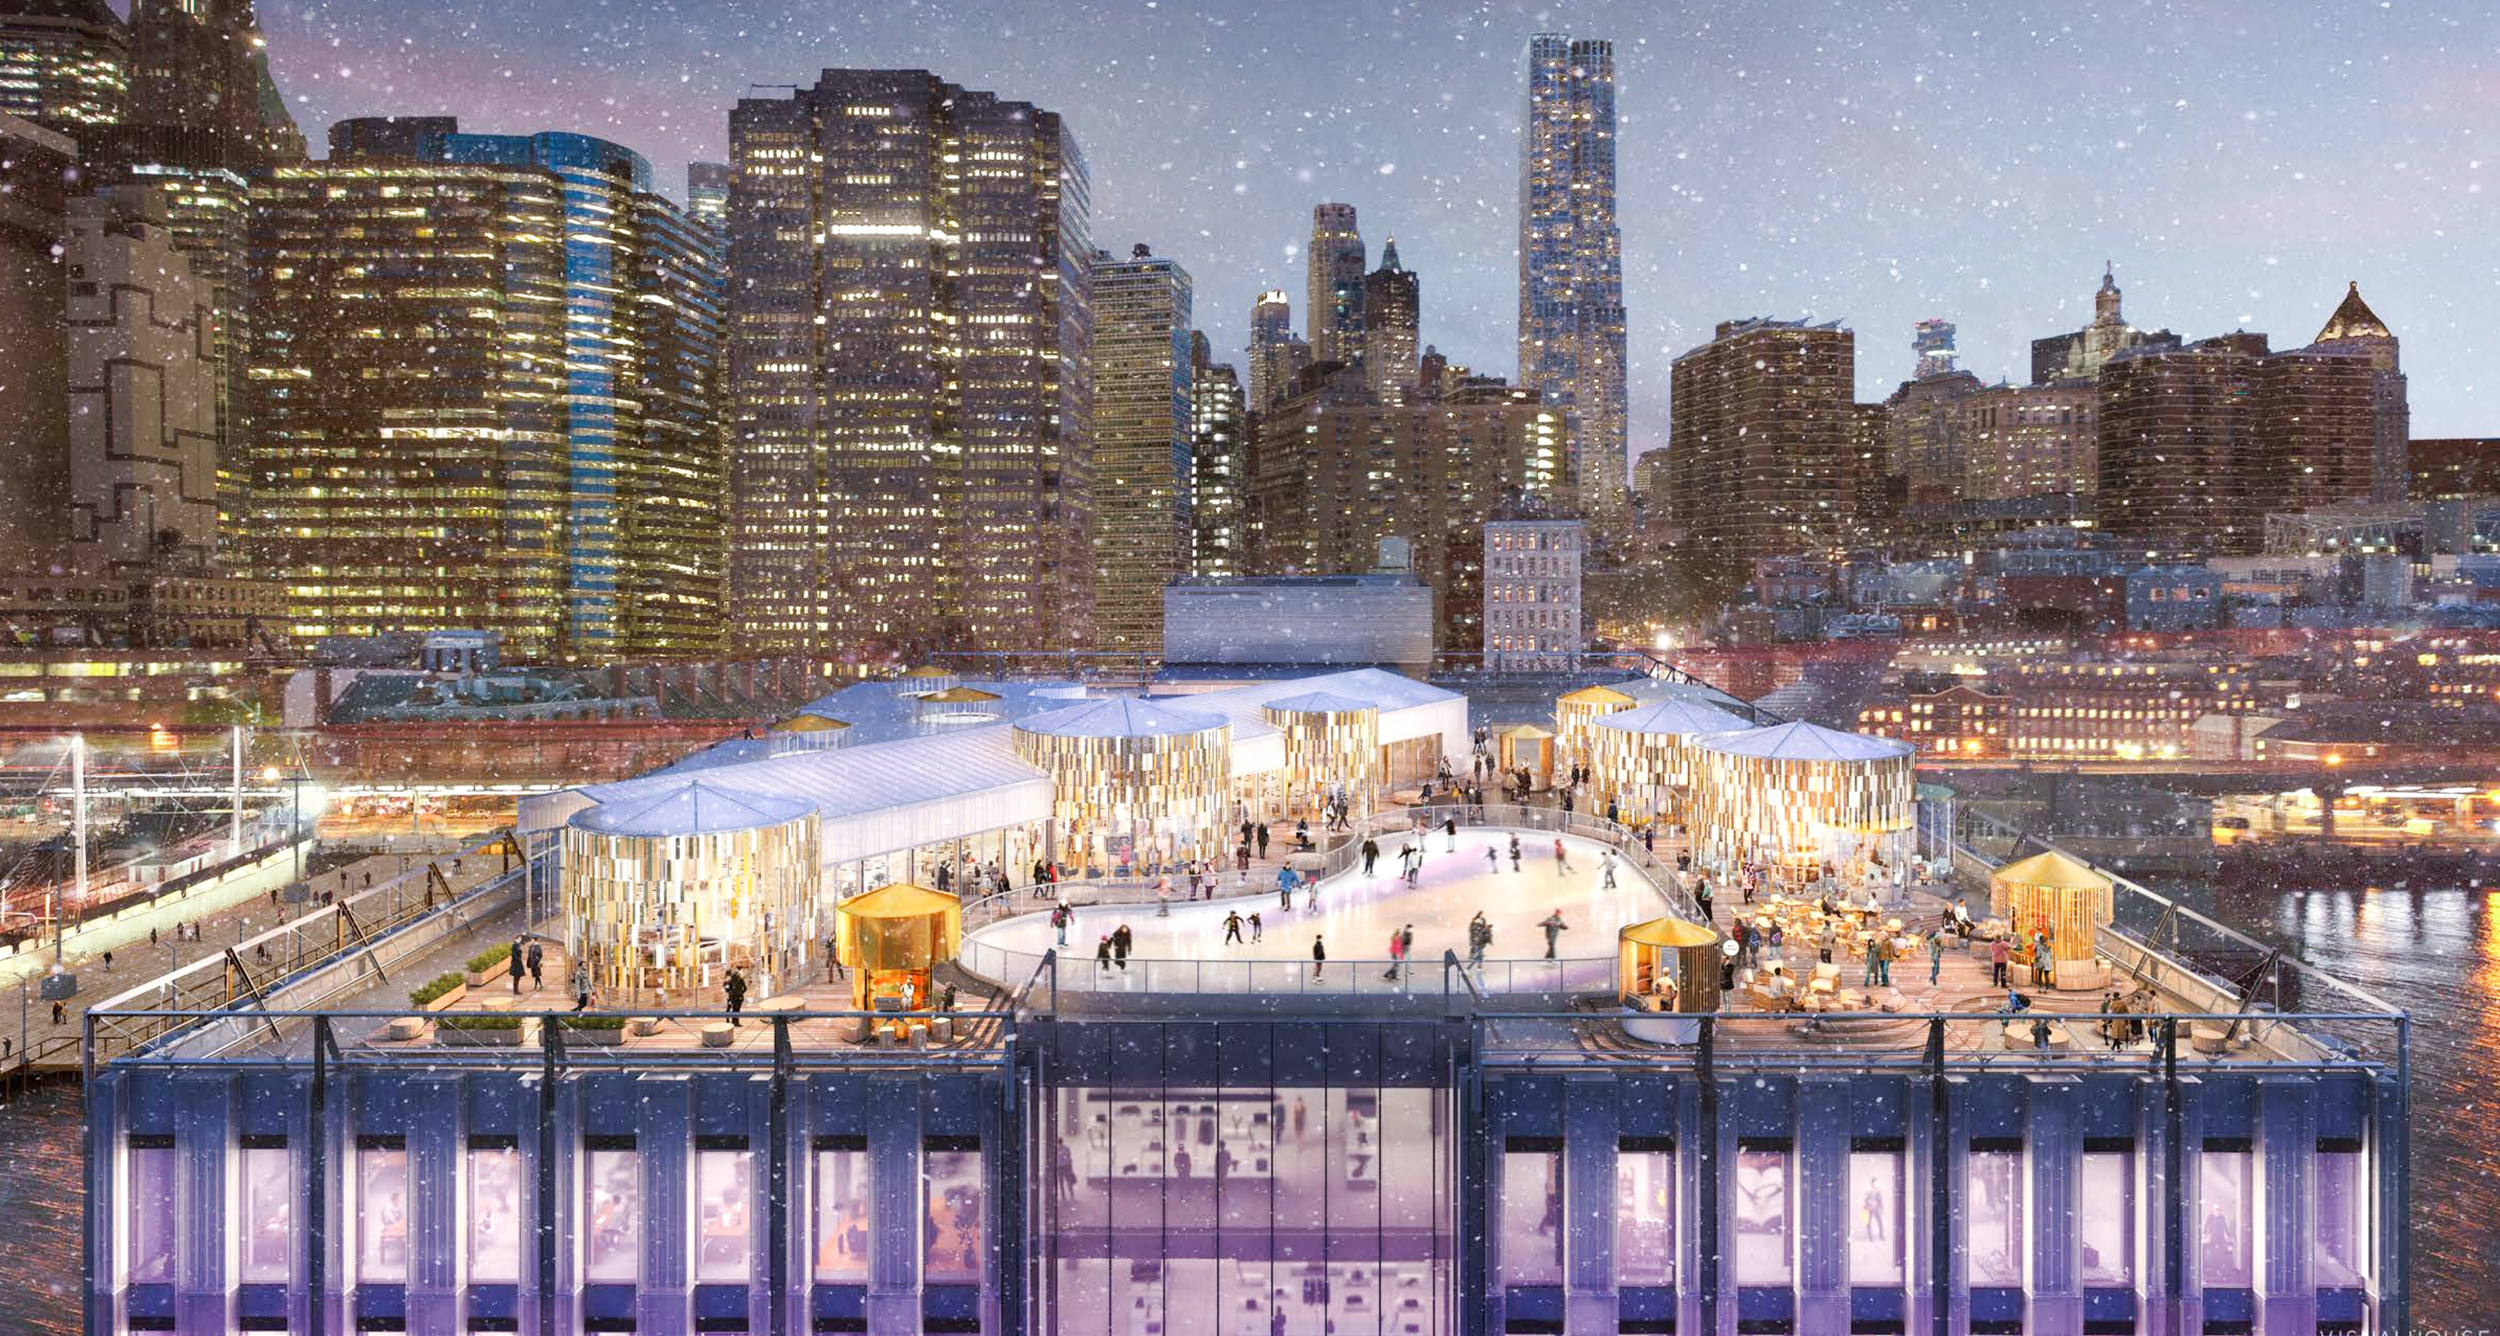 Pier 17 Winter Village Proposal, rendering by Visual House